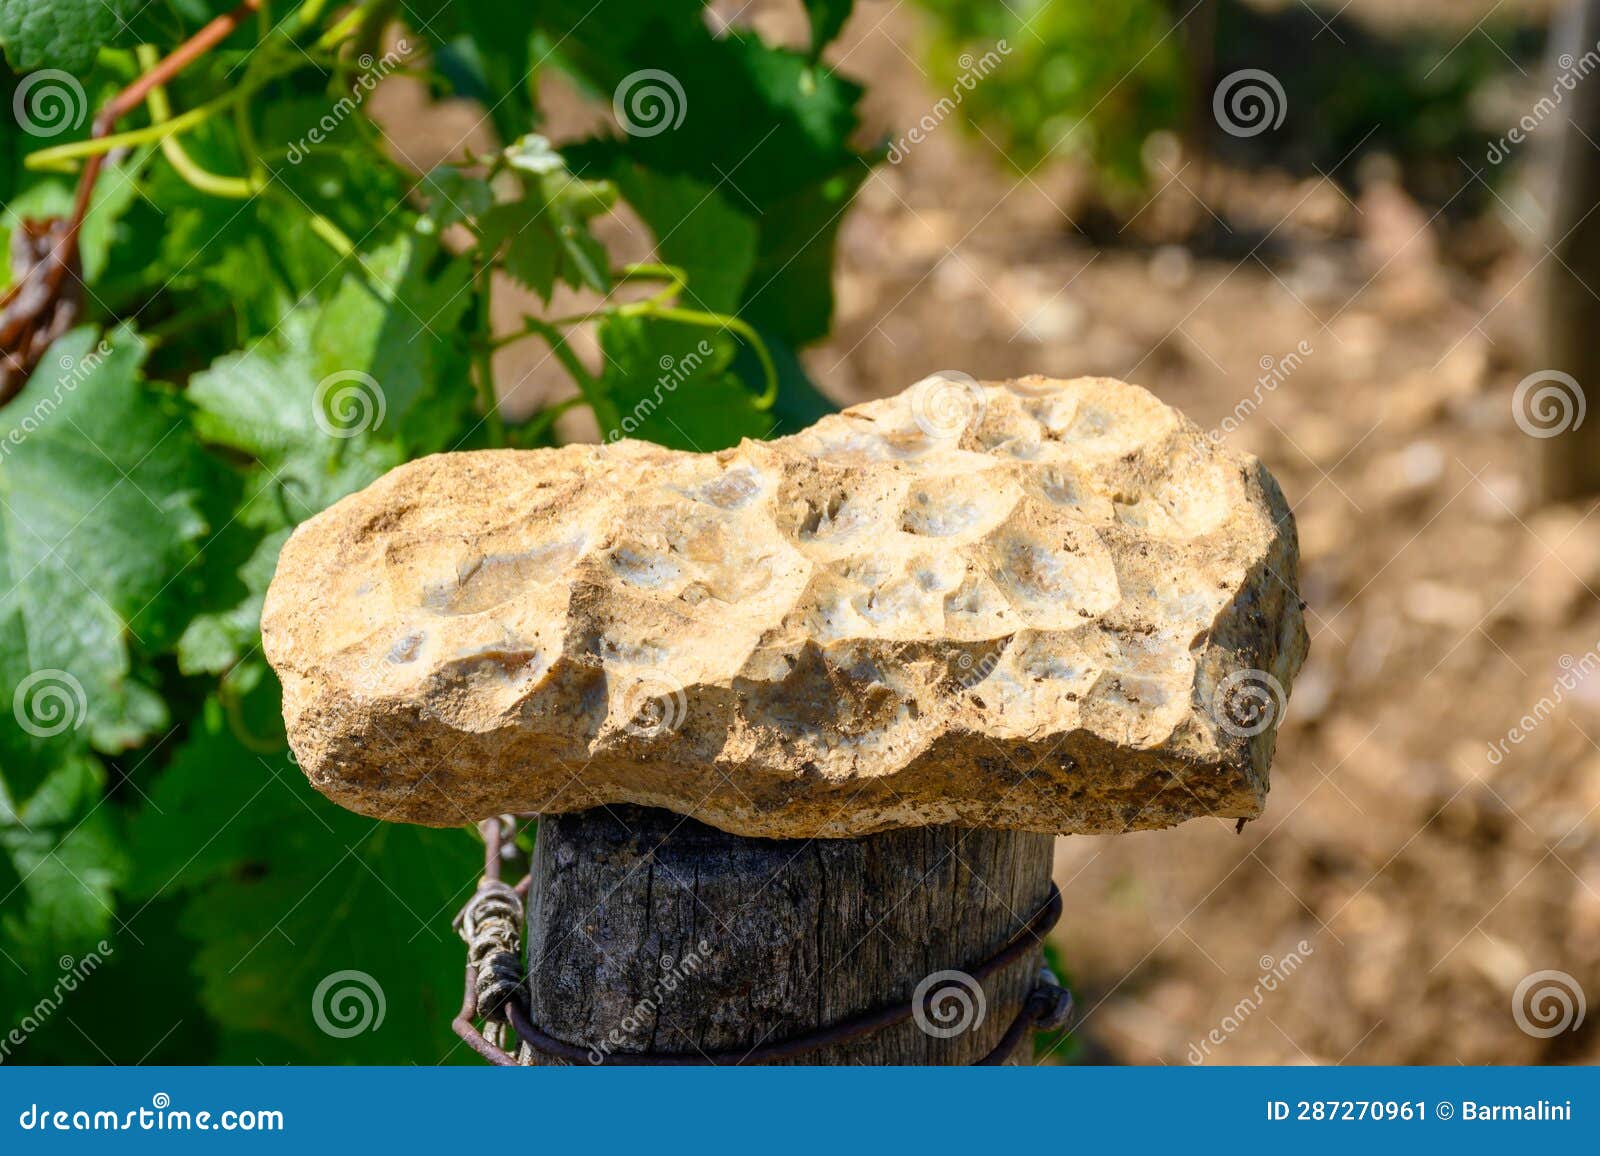 sample of soil, flint stone, vineyards of pouilly-fume appellation, making of dry white wine from sauvignon blanc grape growing on